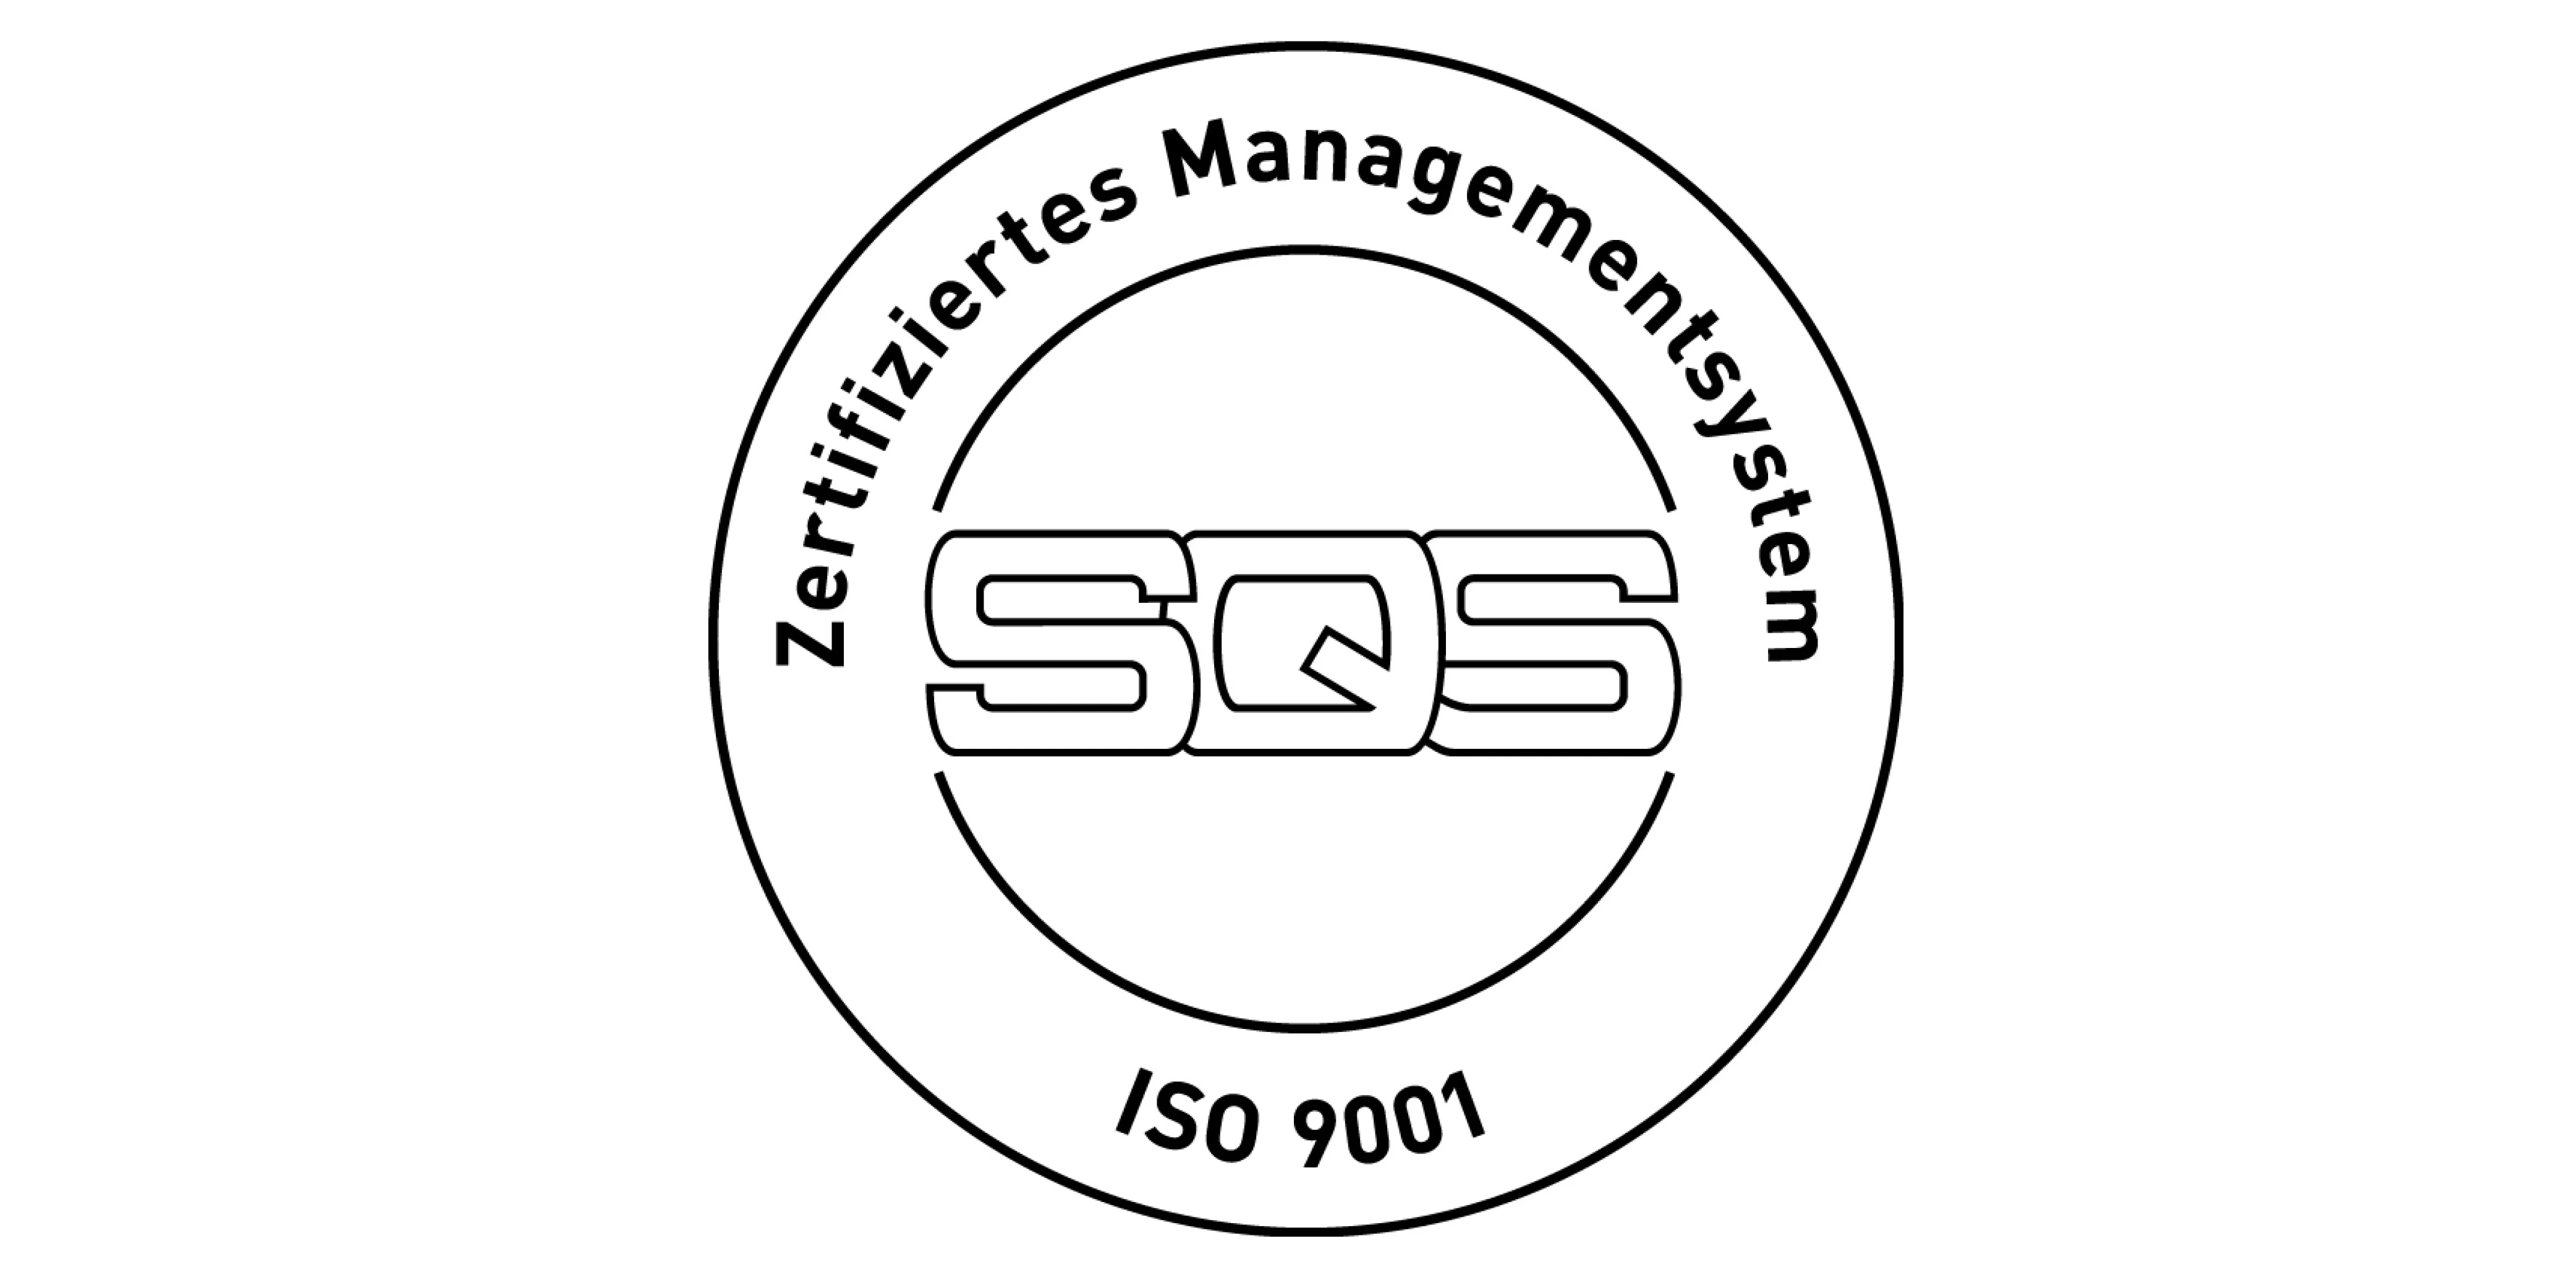 Successful recertification according to ISO 9001:2015